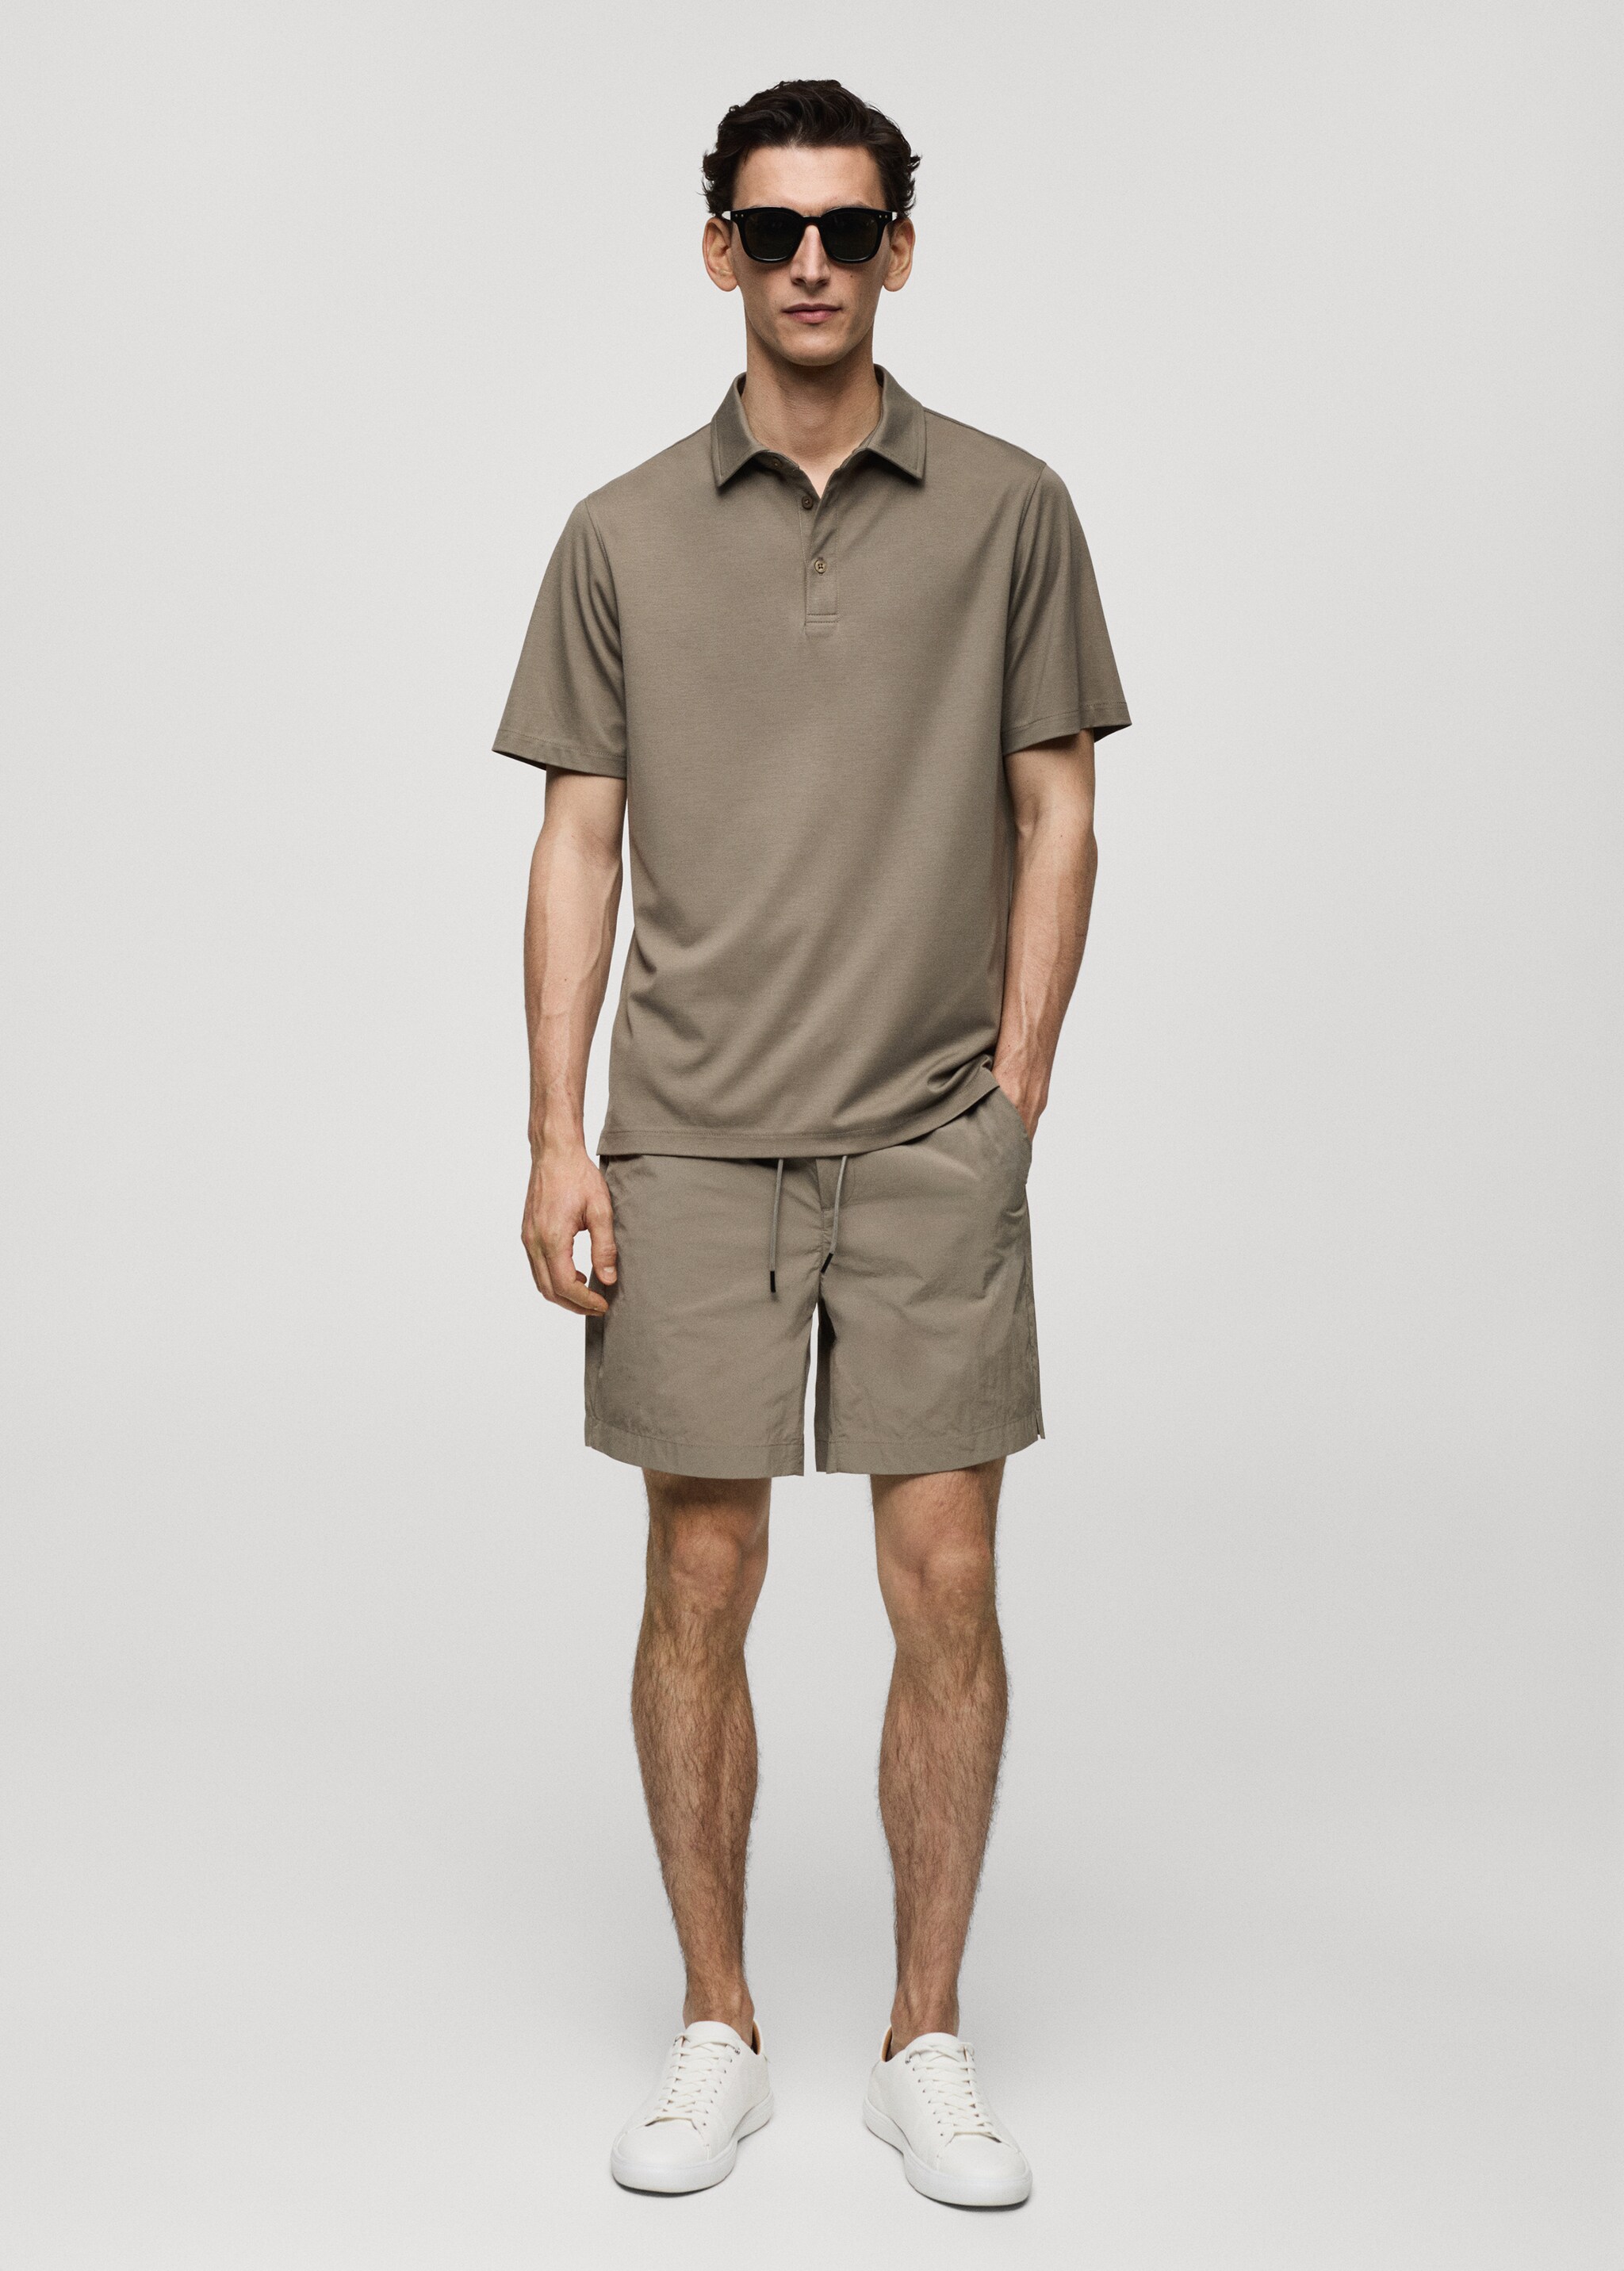 Polo slim fit quick dry - Plano general